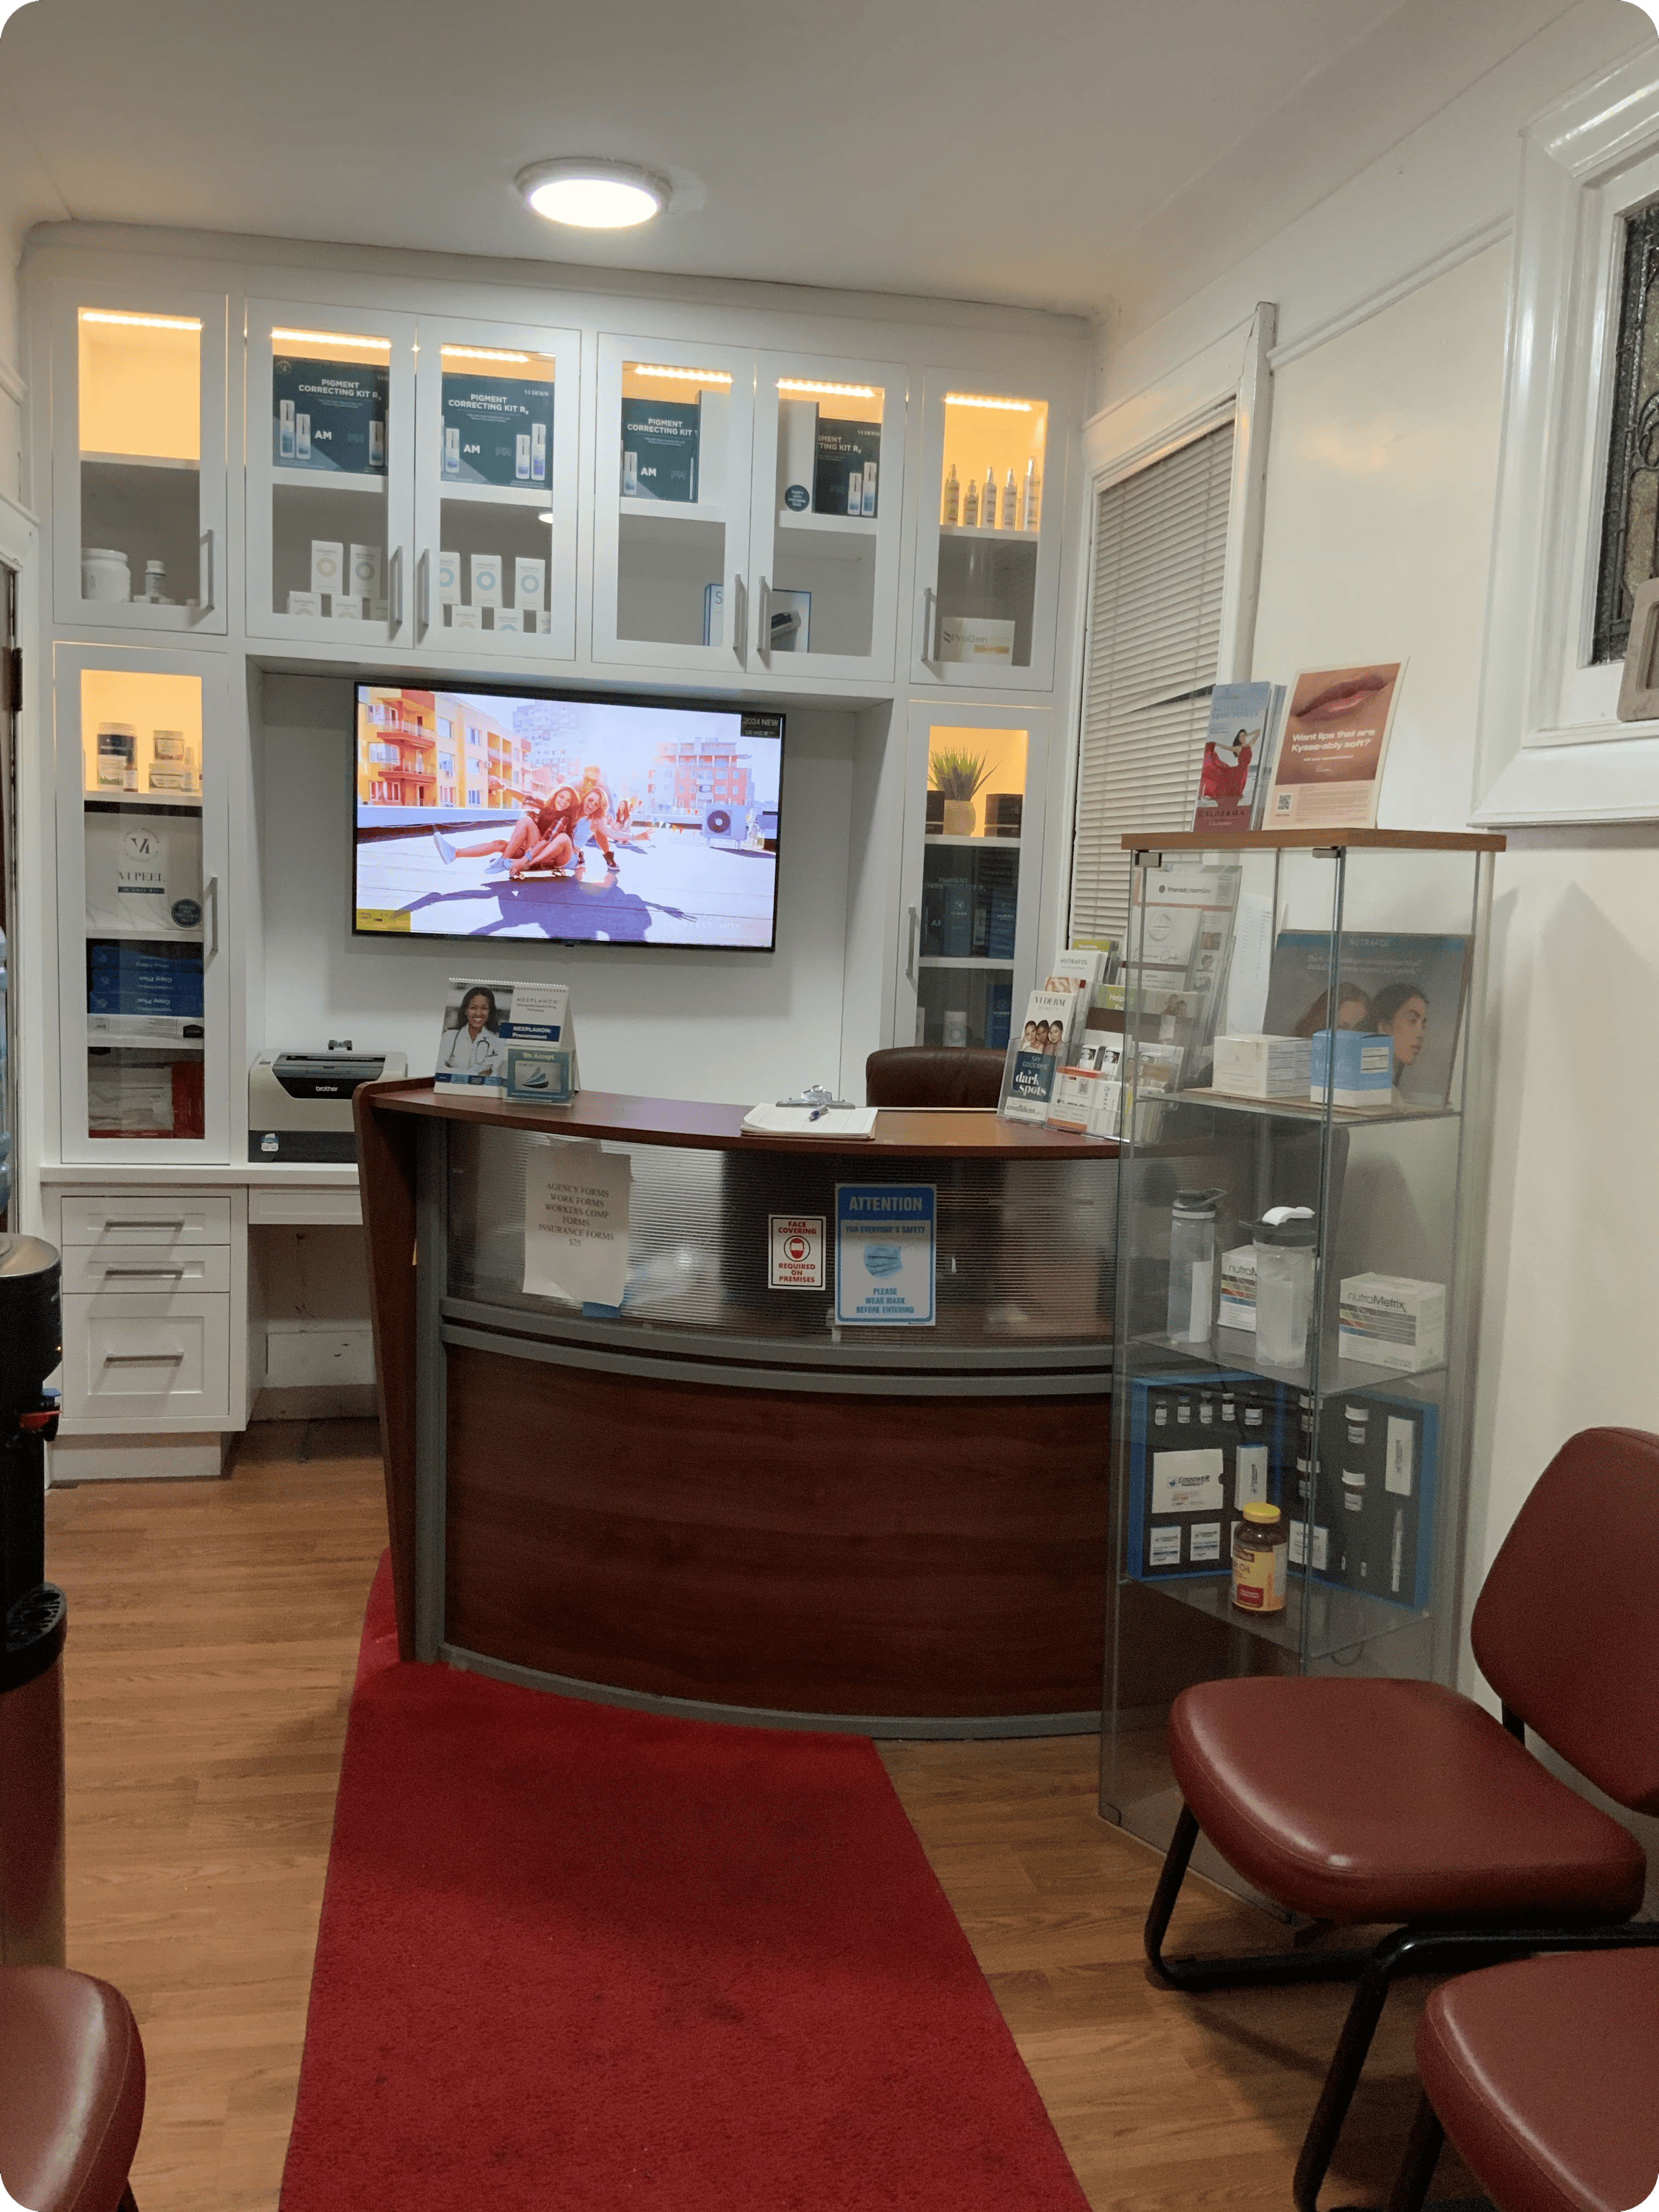 Small primary care office waiting area with a curved reception desk, glass display cabinets, wall-mounted TV showing a cartoon, and red cushioned chairs on a wooden floor.